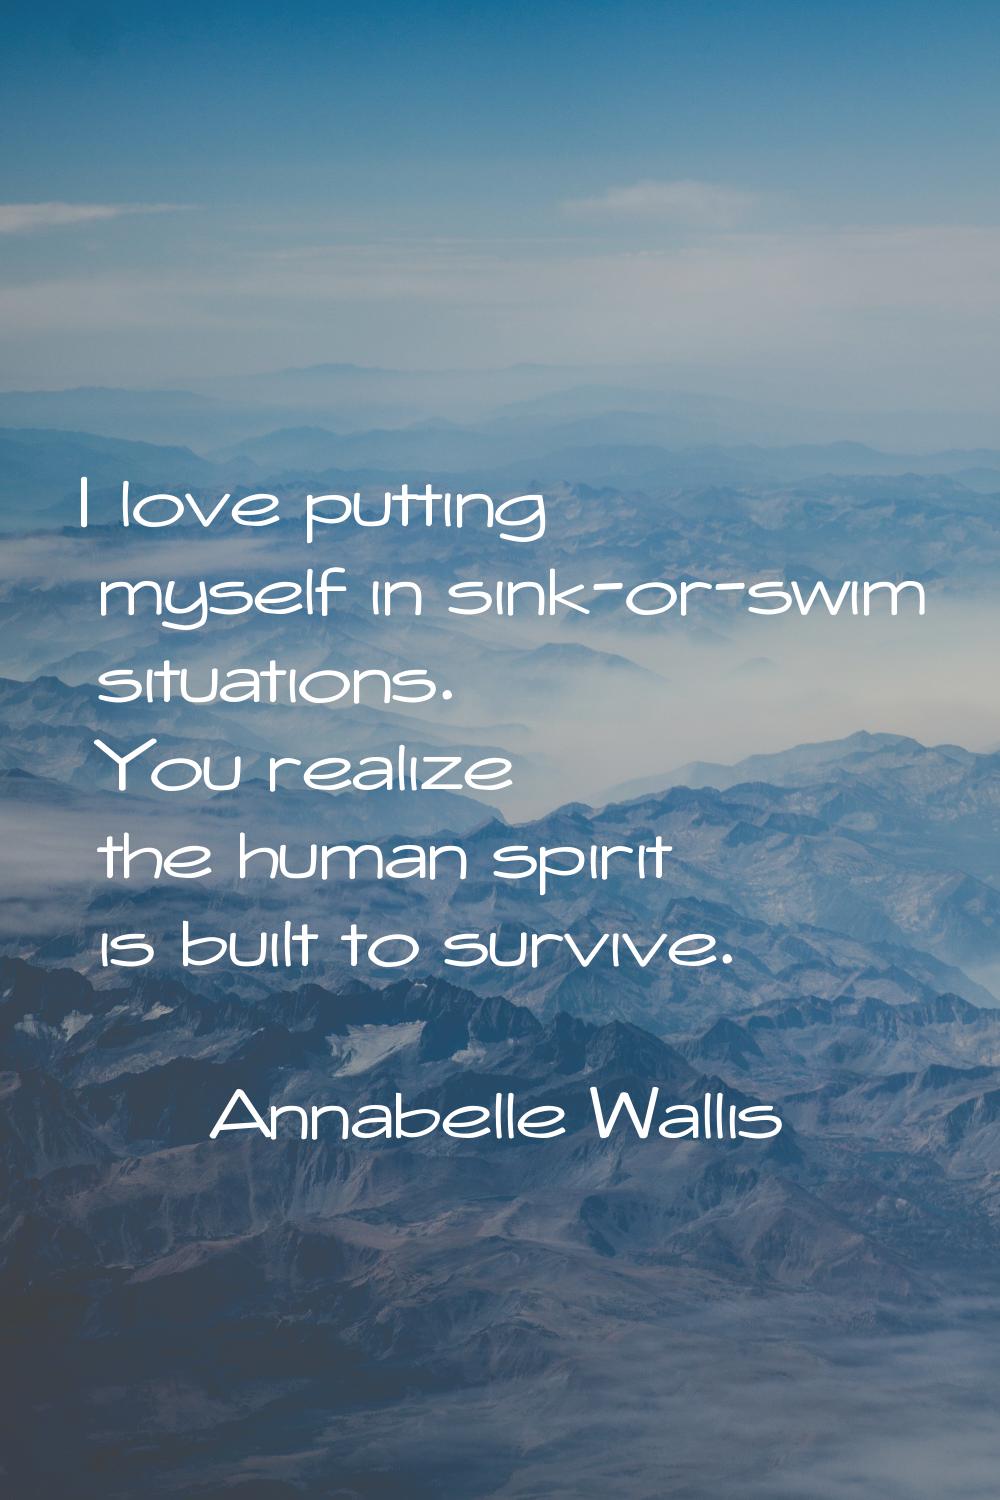 I love putting myself in sink-or-swim situations. You realize the human spirit is built to survive.